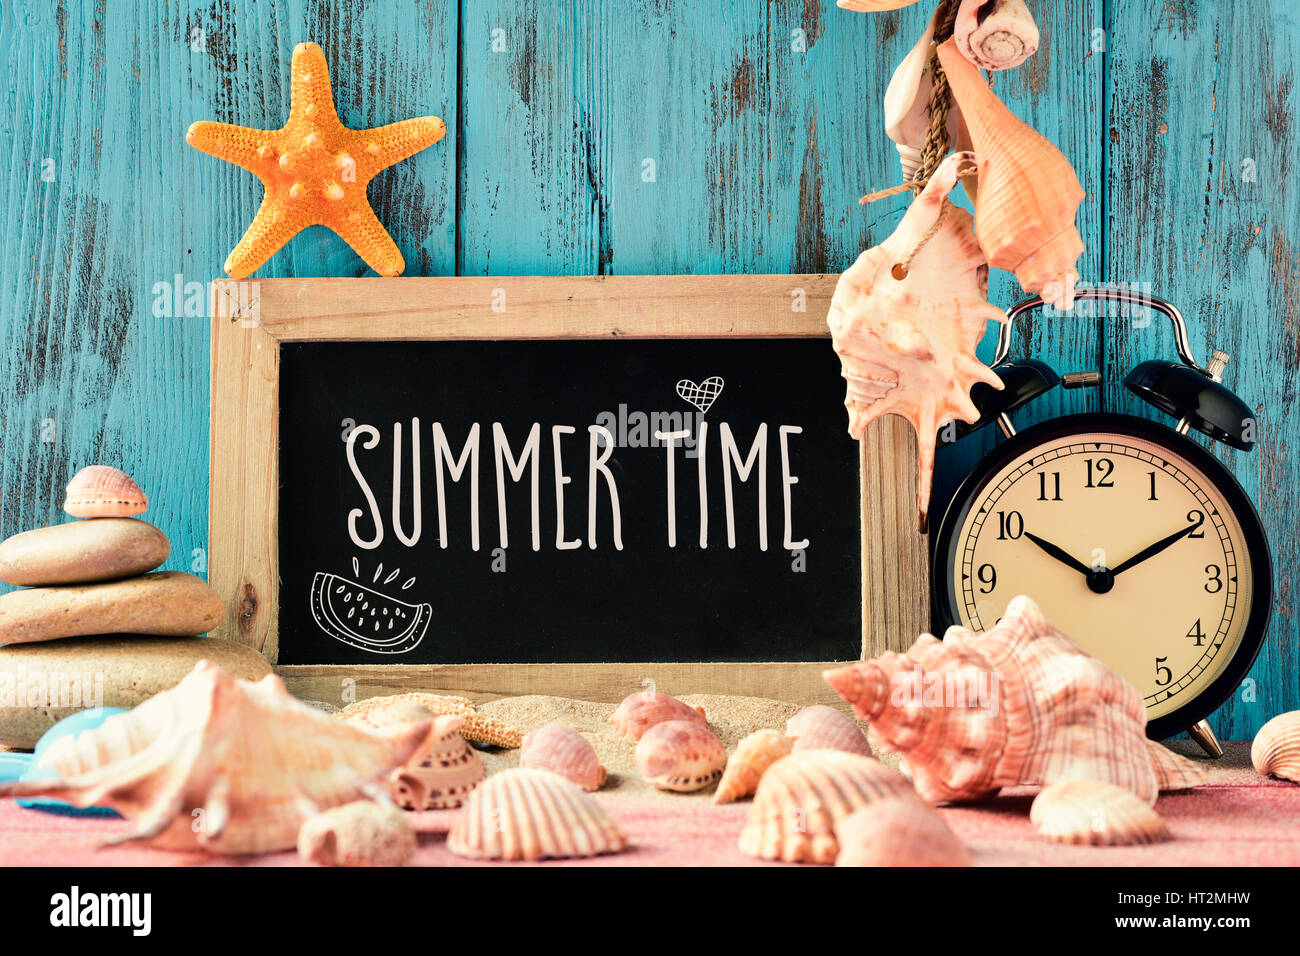 closeup of a chalkboard with the text summer time, an alarm clock, many conches and starfishes, and a beach pail, on a pile of sand, against a bright  Stock Photo